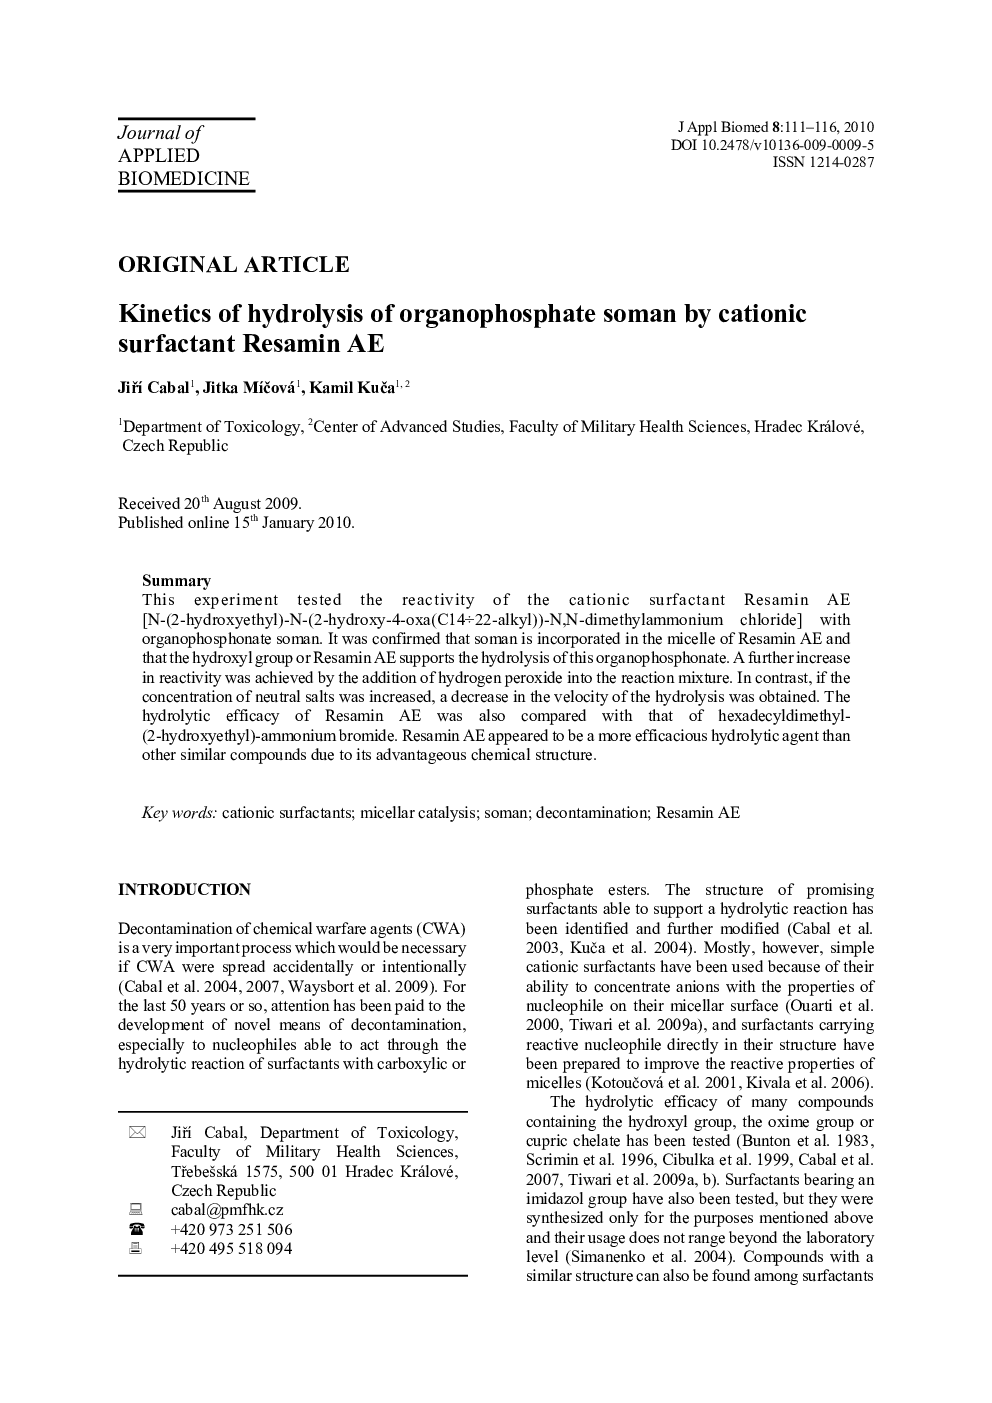 Kinetics of hydrolysis of organophosphate soman by cationic surfactant Resamin AE 